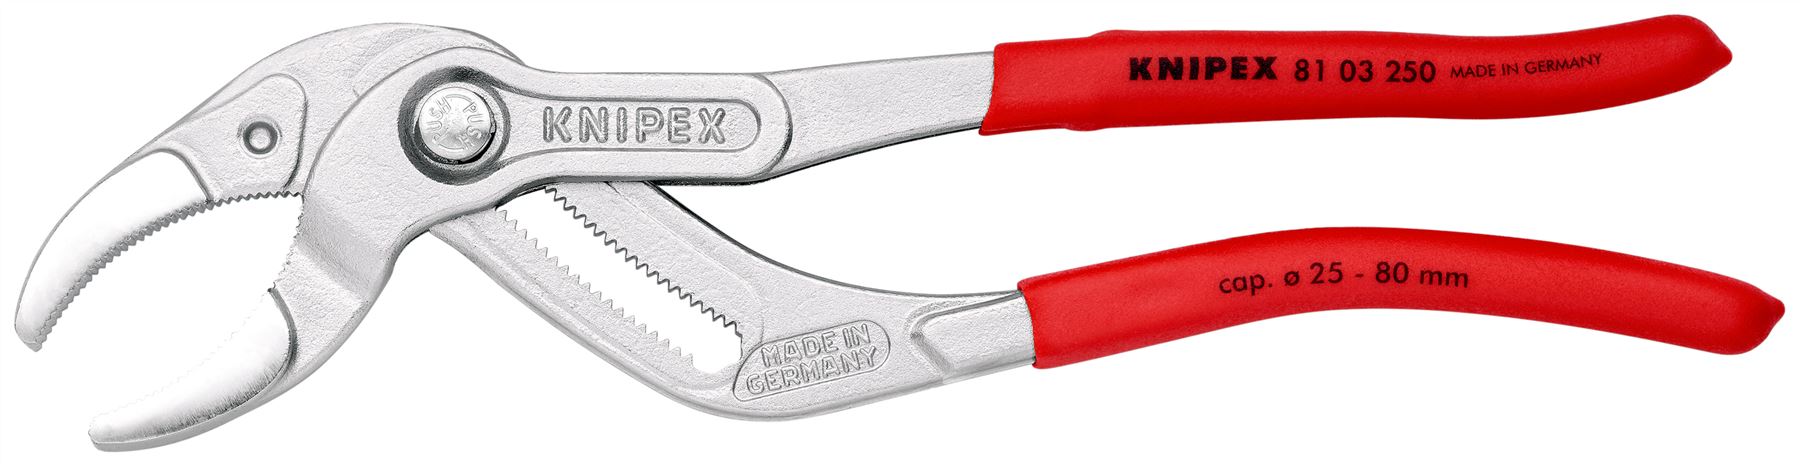 KNIPEX Siphon and Connector Pliers for Traps Tube Fittings Connectors 250mm Chrome Plastic Coated 81 03 250